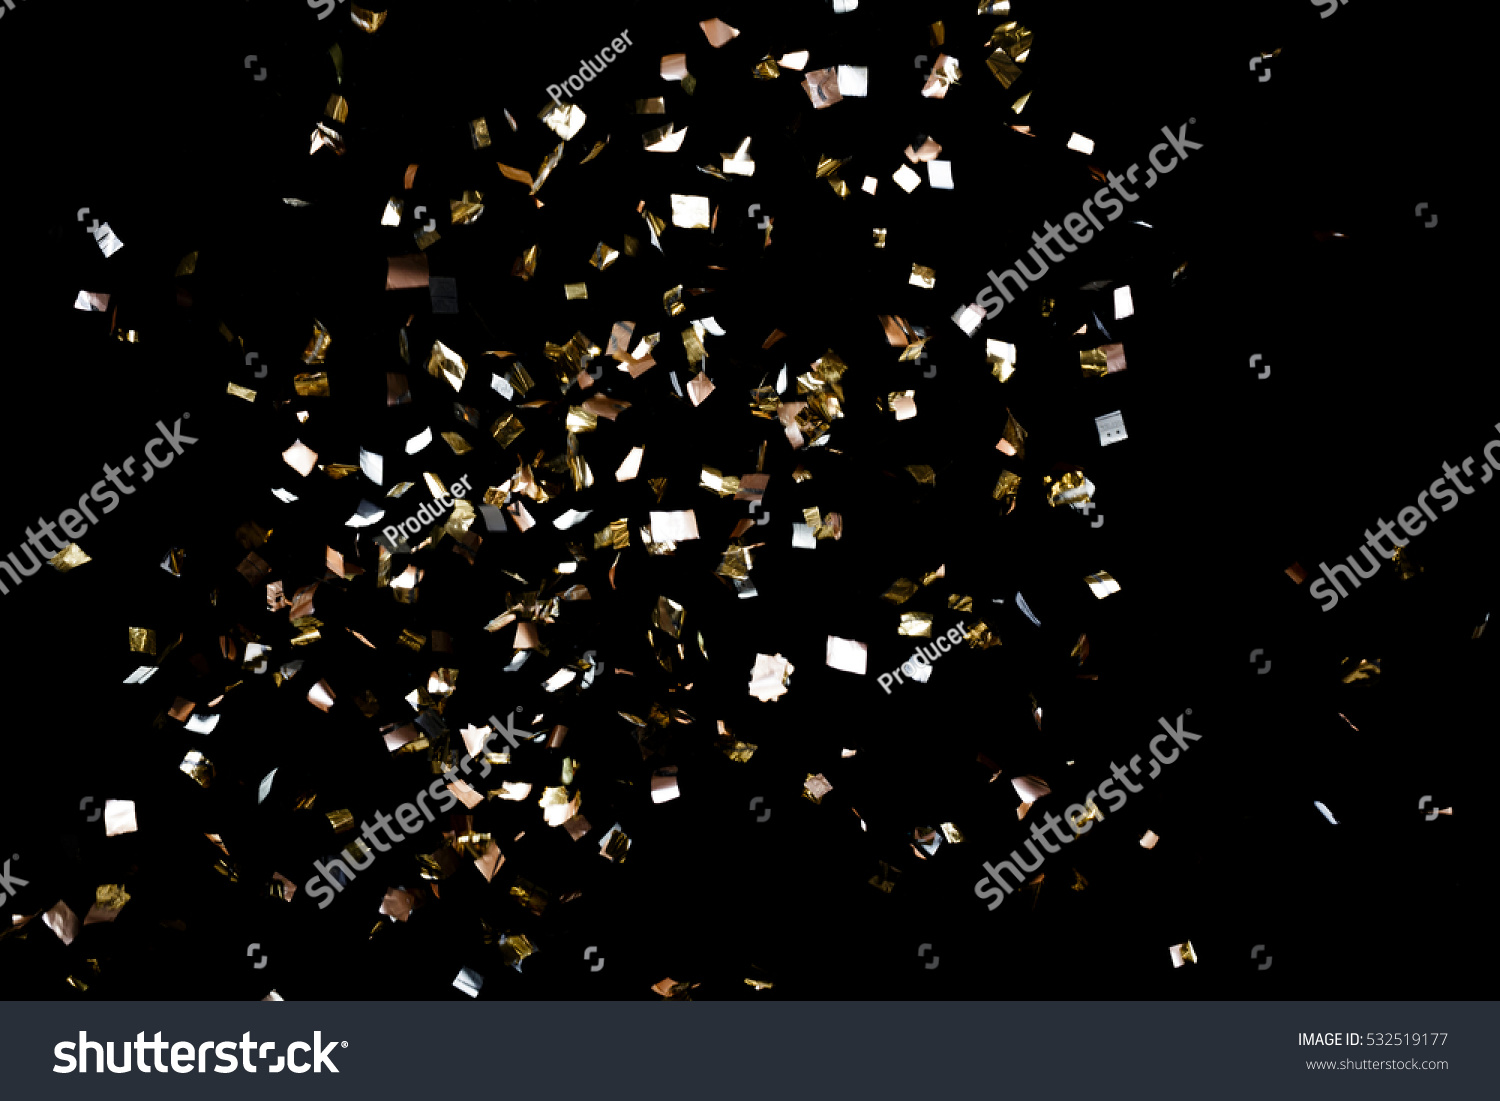 Golden confetti isolated on black background #532519177